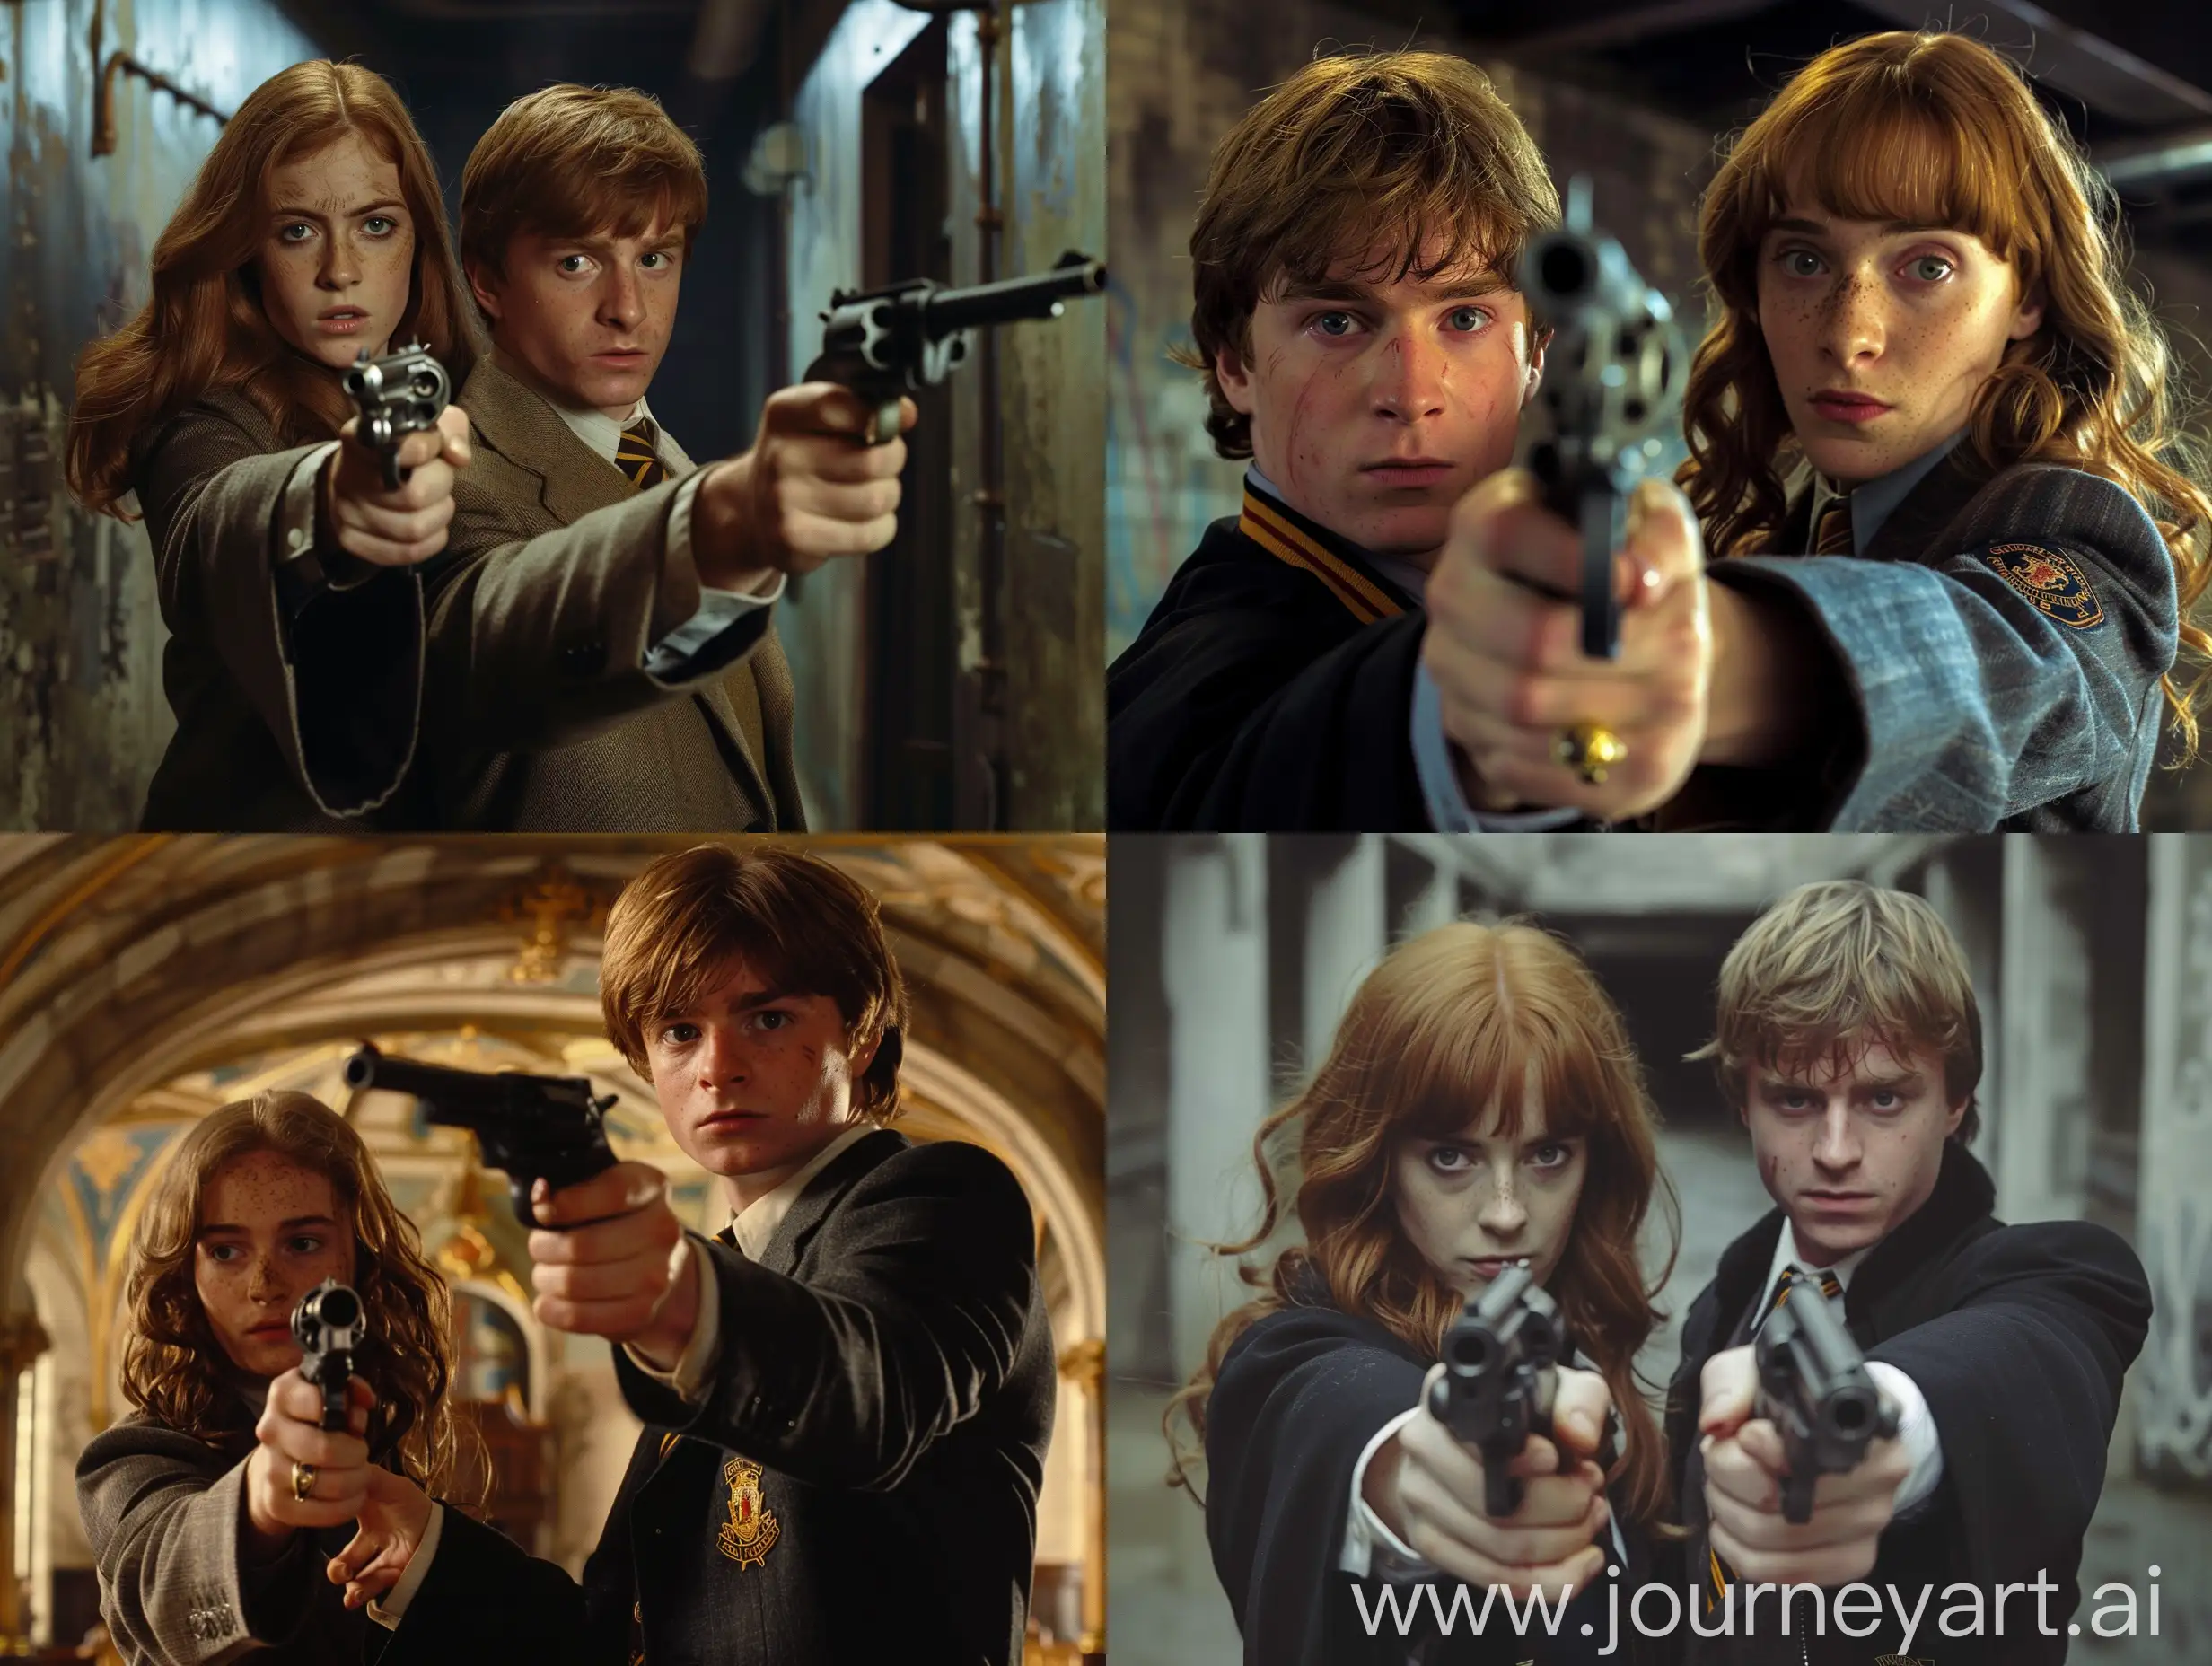 Ron-Weasley-and-Hermione-in-Action-Secret-Agents-Mission